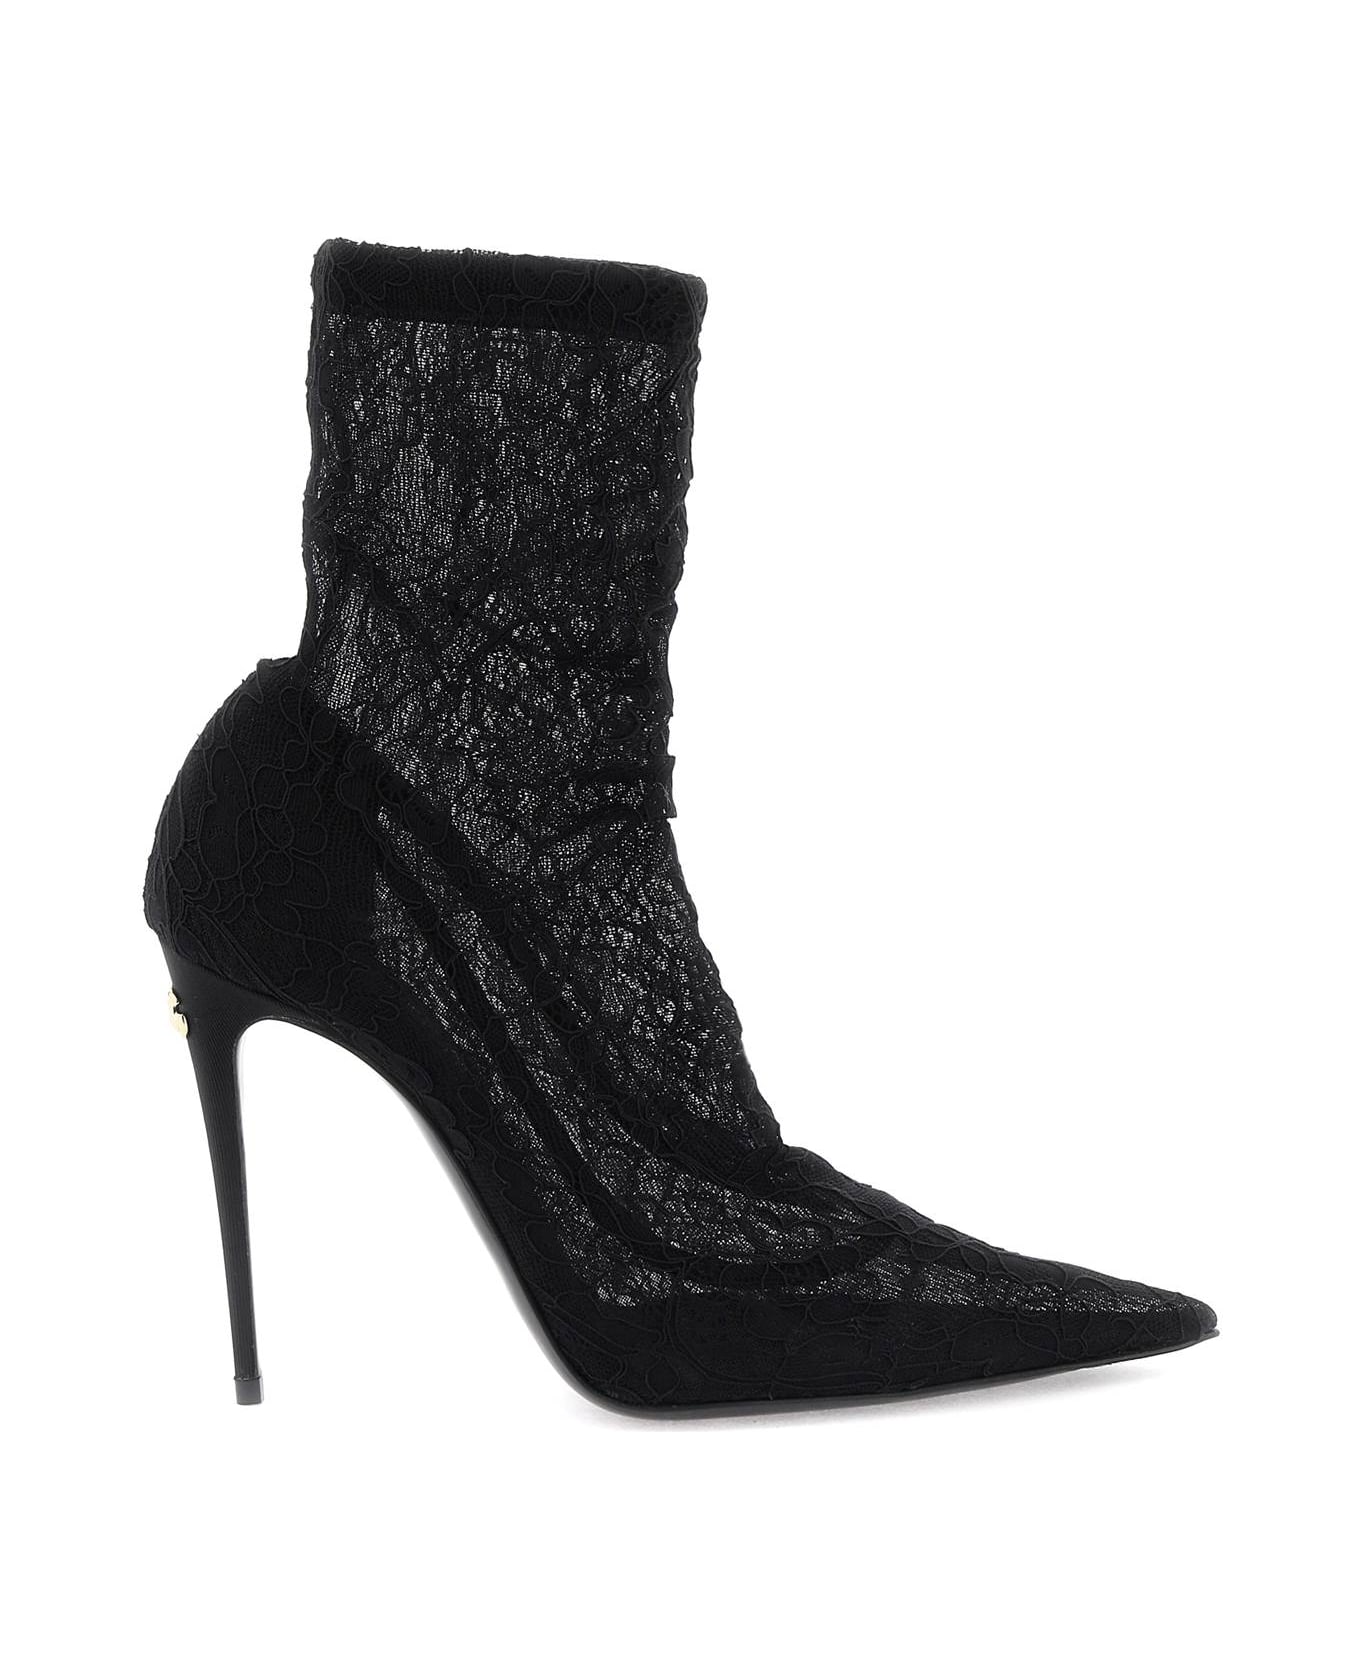 Dolce & Gabbana Lace Ankle Boots - Black